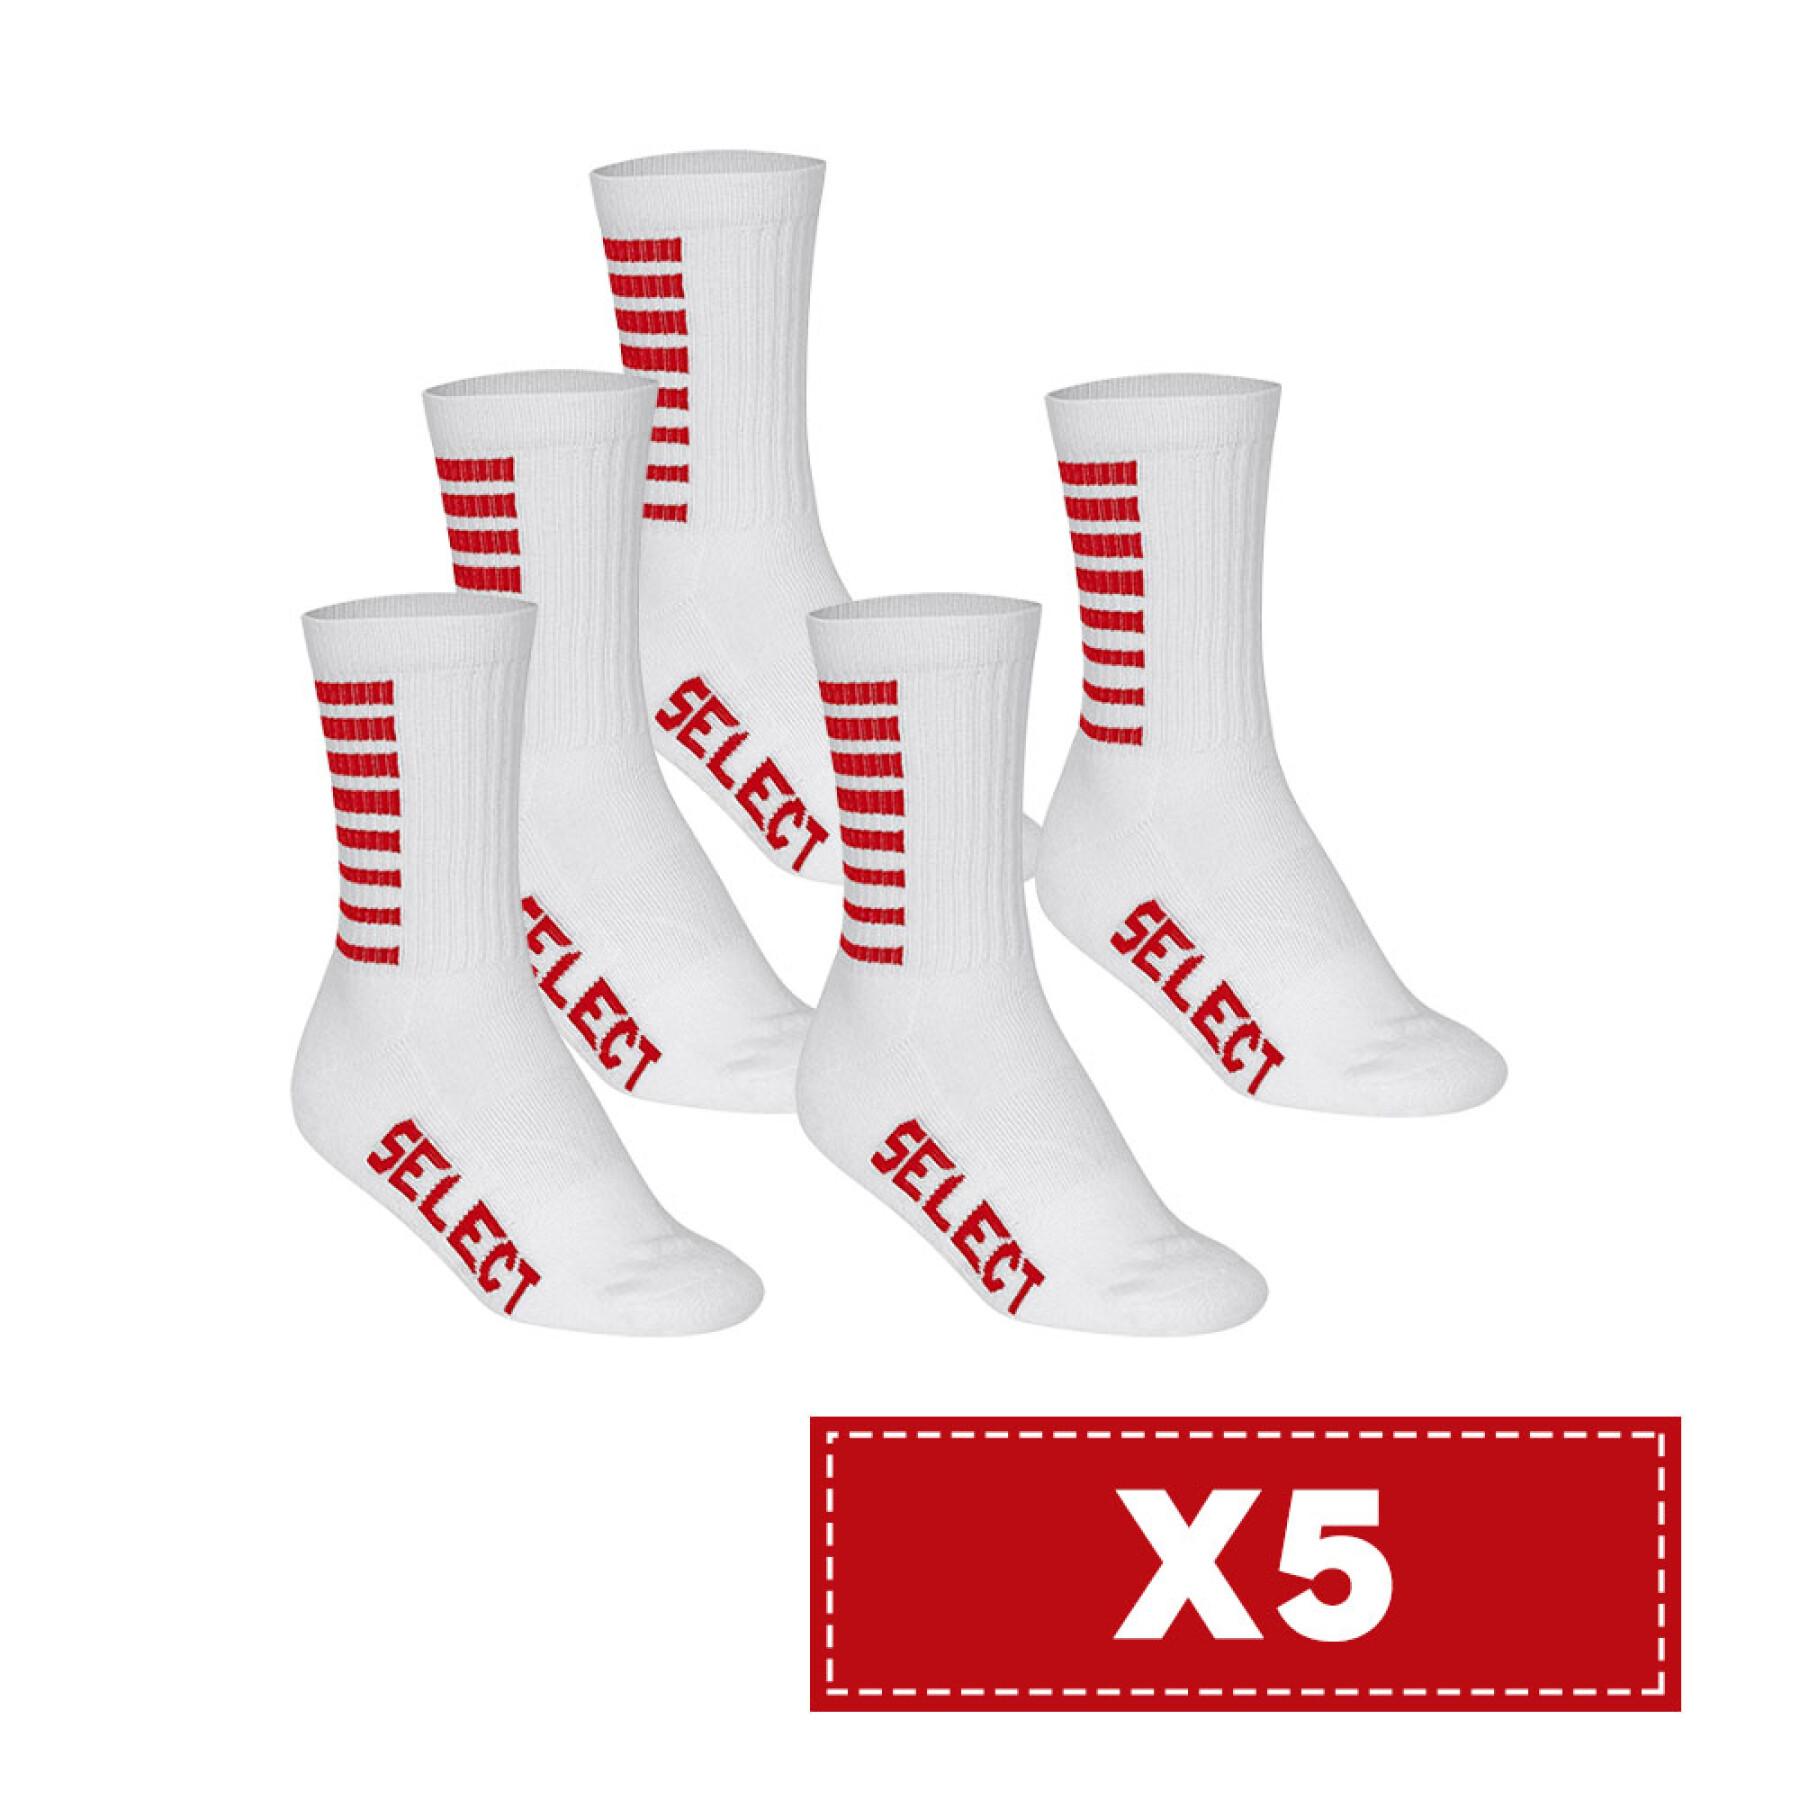 Pack of 10 pairs of socks Select Basic